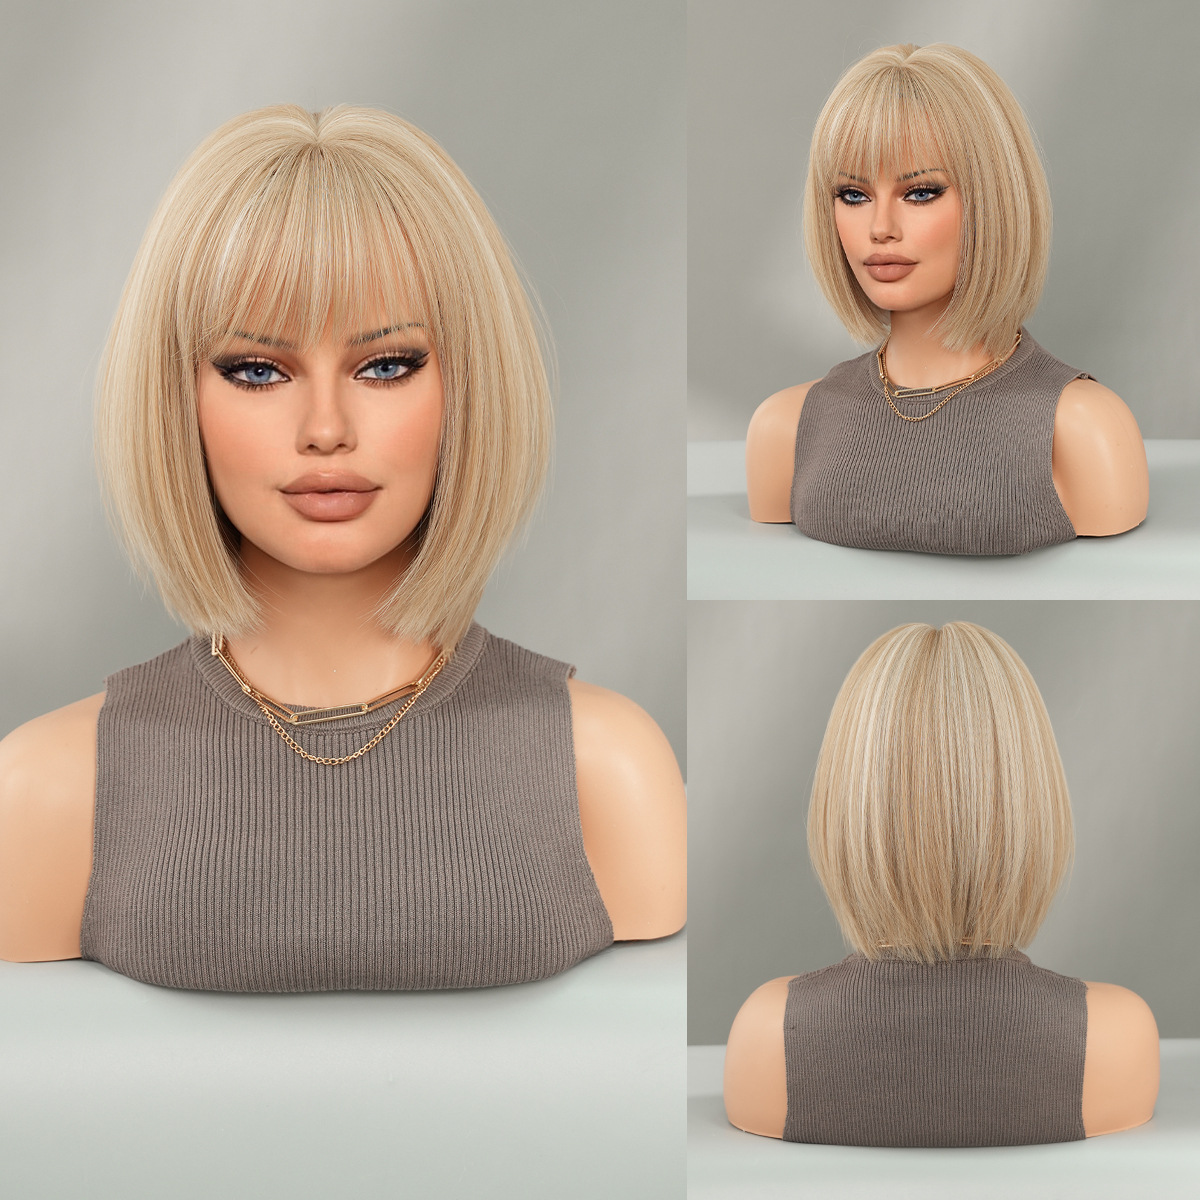 Synthetic wig styled in a YAKI black bob, featuring short straight hair and bangs, ready to go